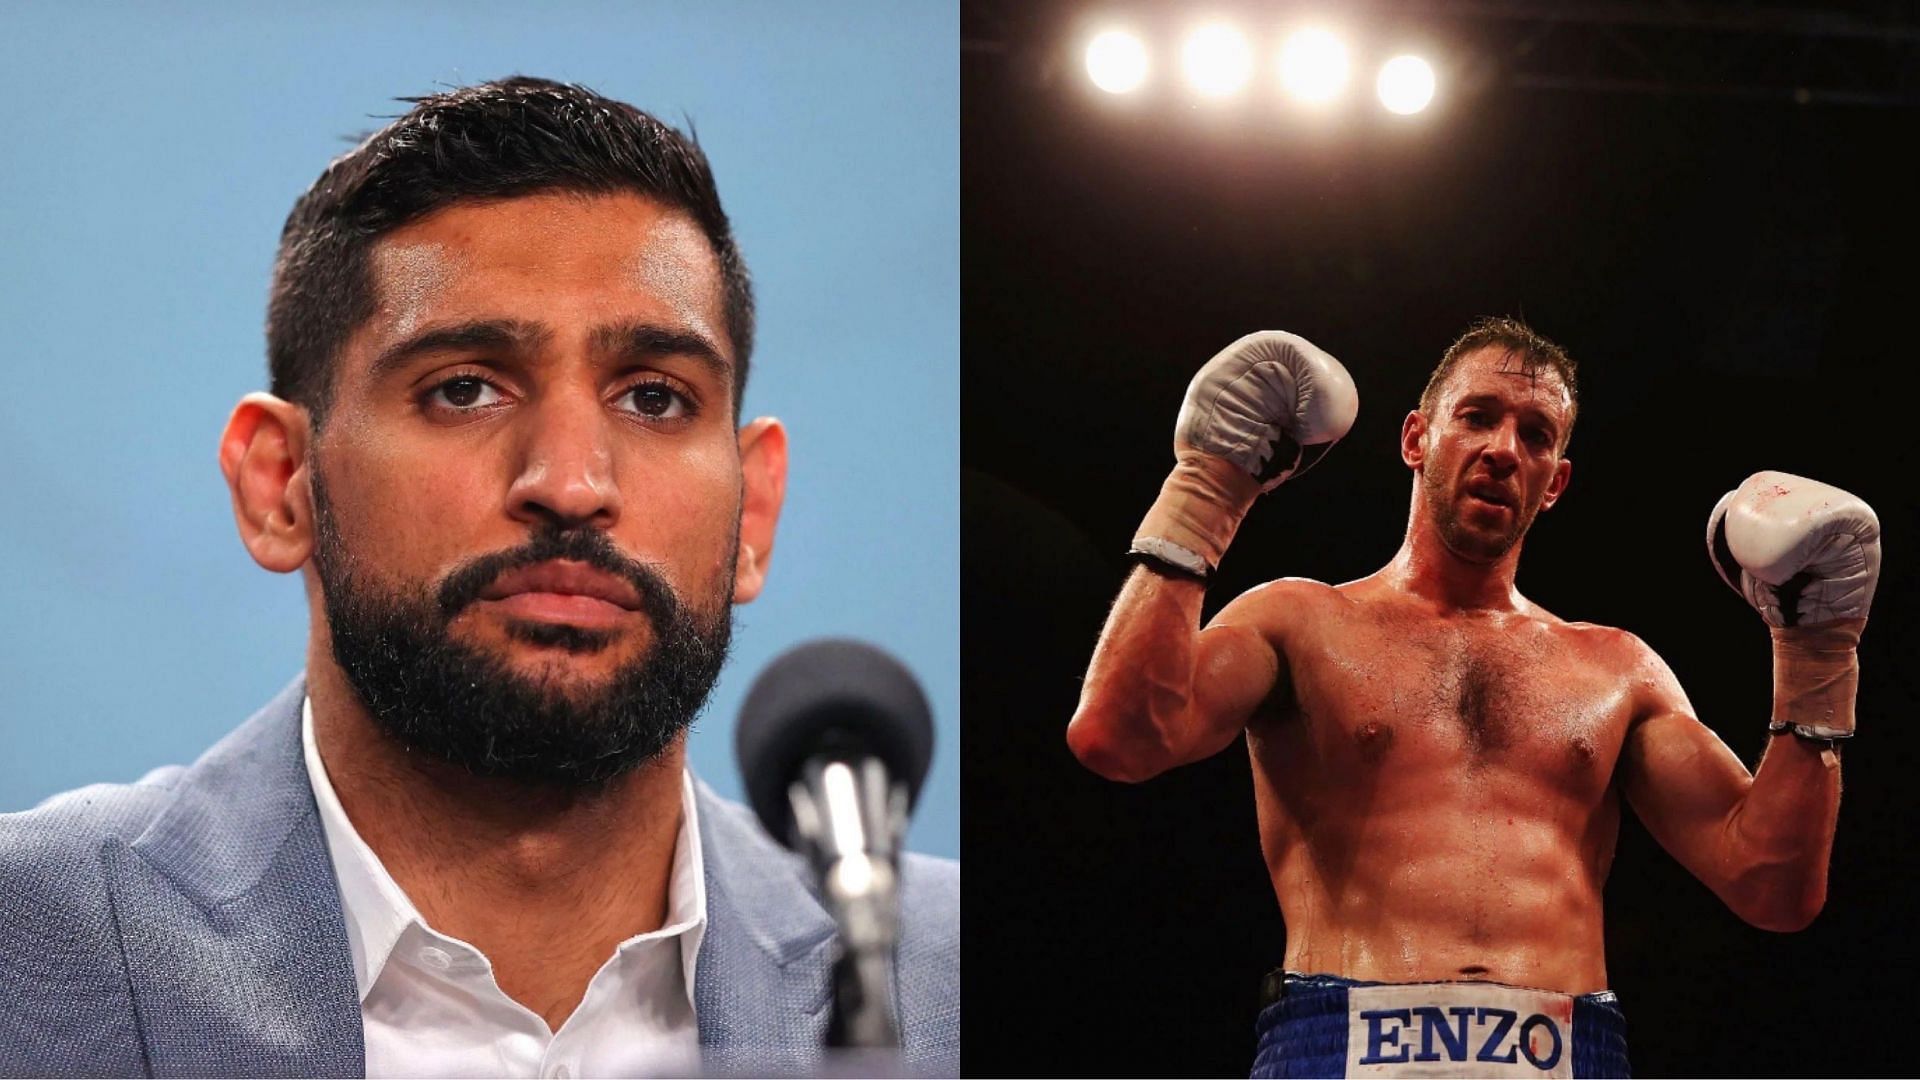 Amir Khan (left), Enzo Maccarinelli (right) [images courtesy of Getty]